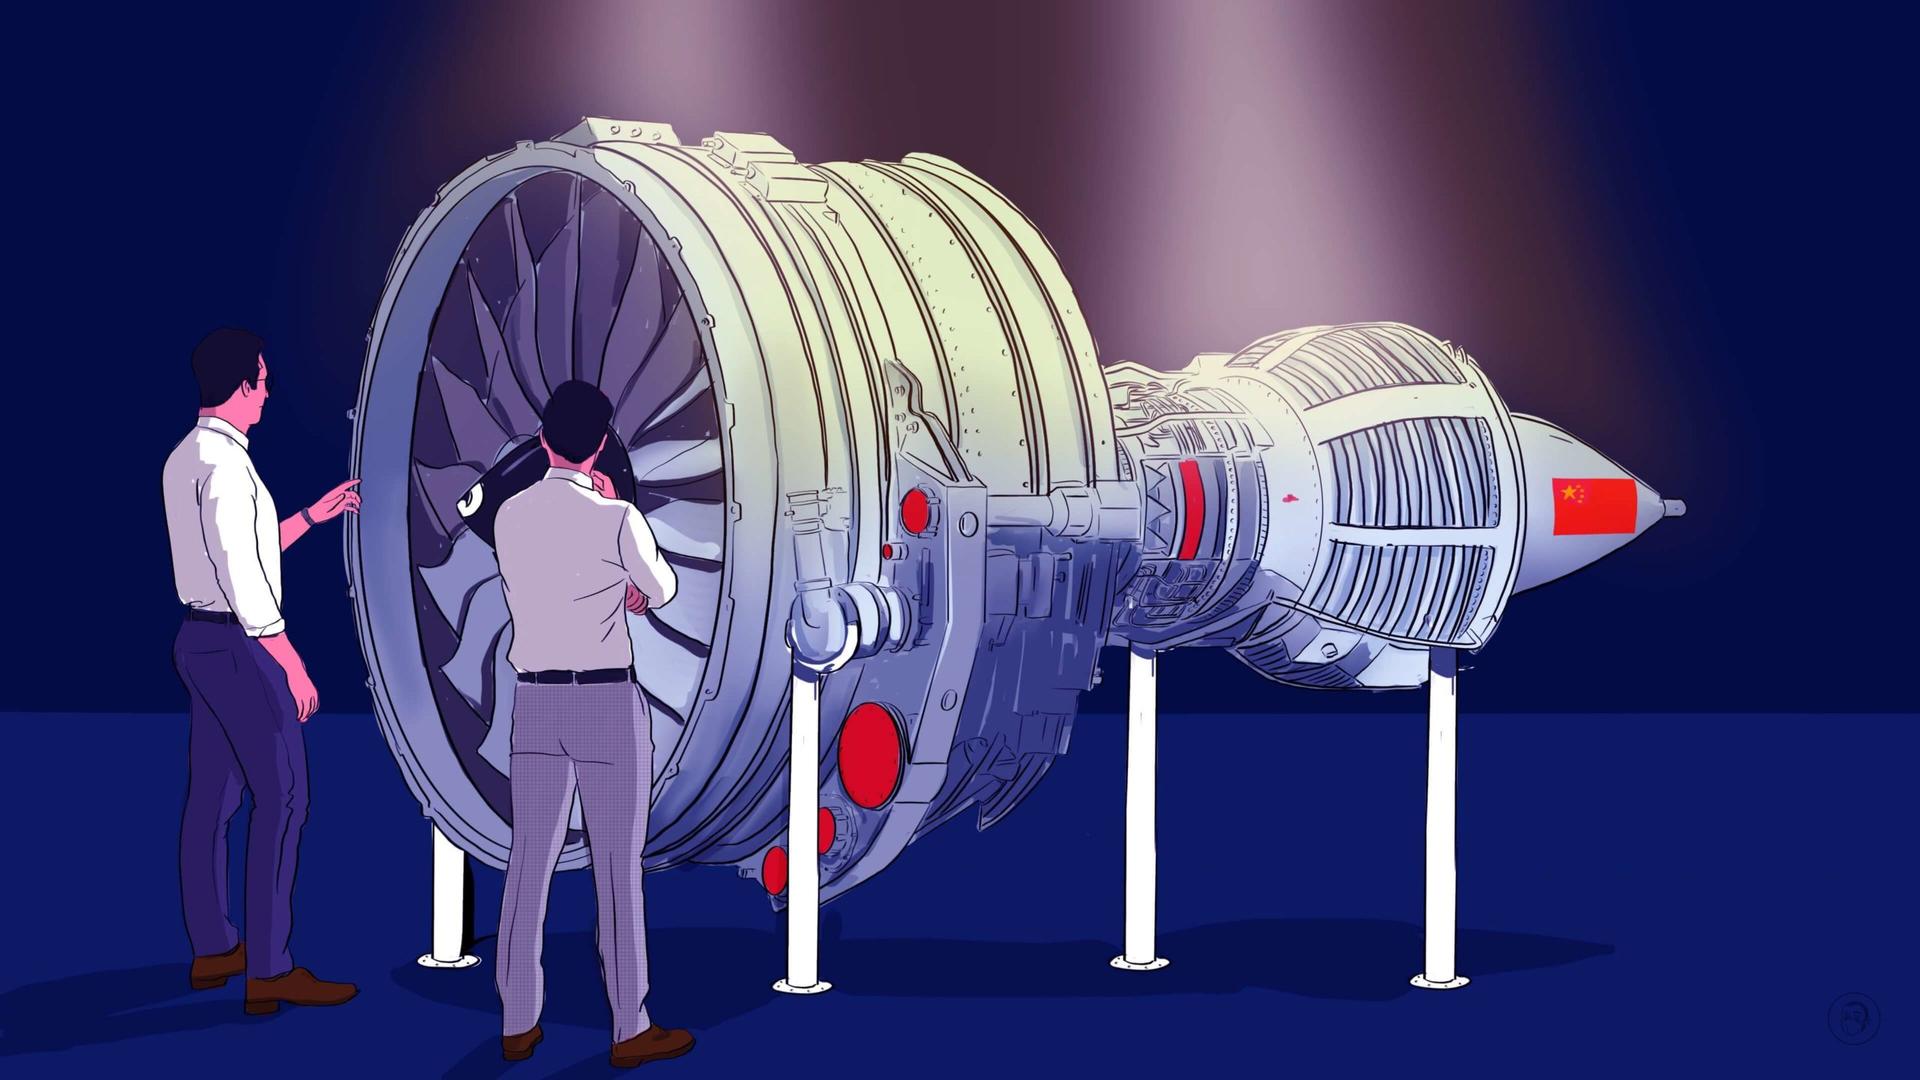 An illustration by Alex Santafe depicting two visitors admiring the new China Jet Engine